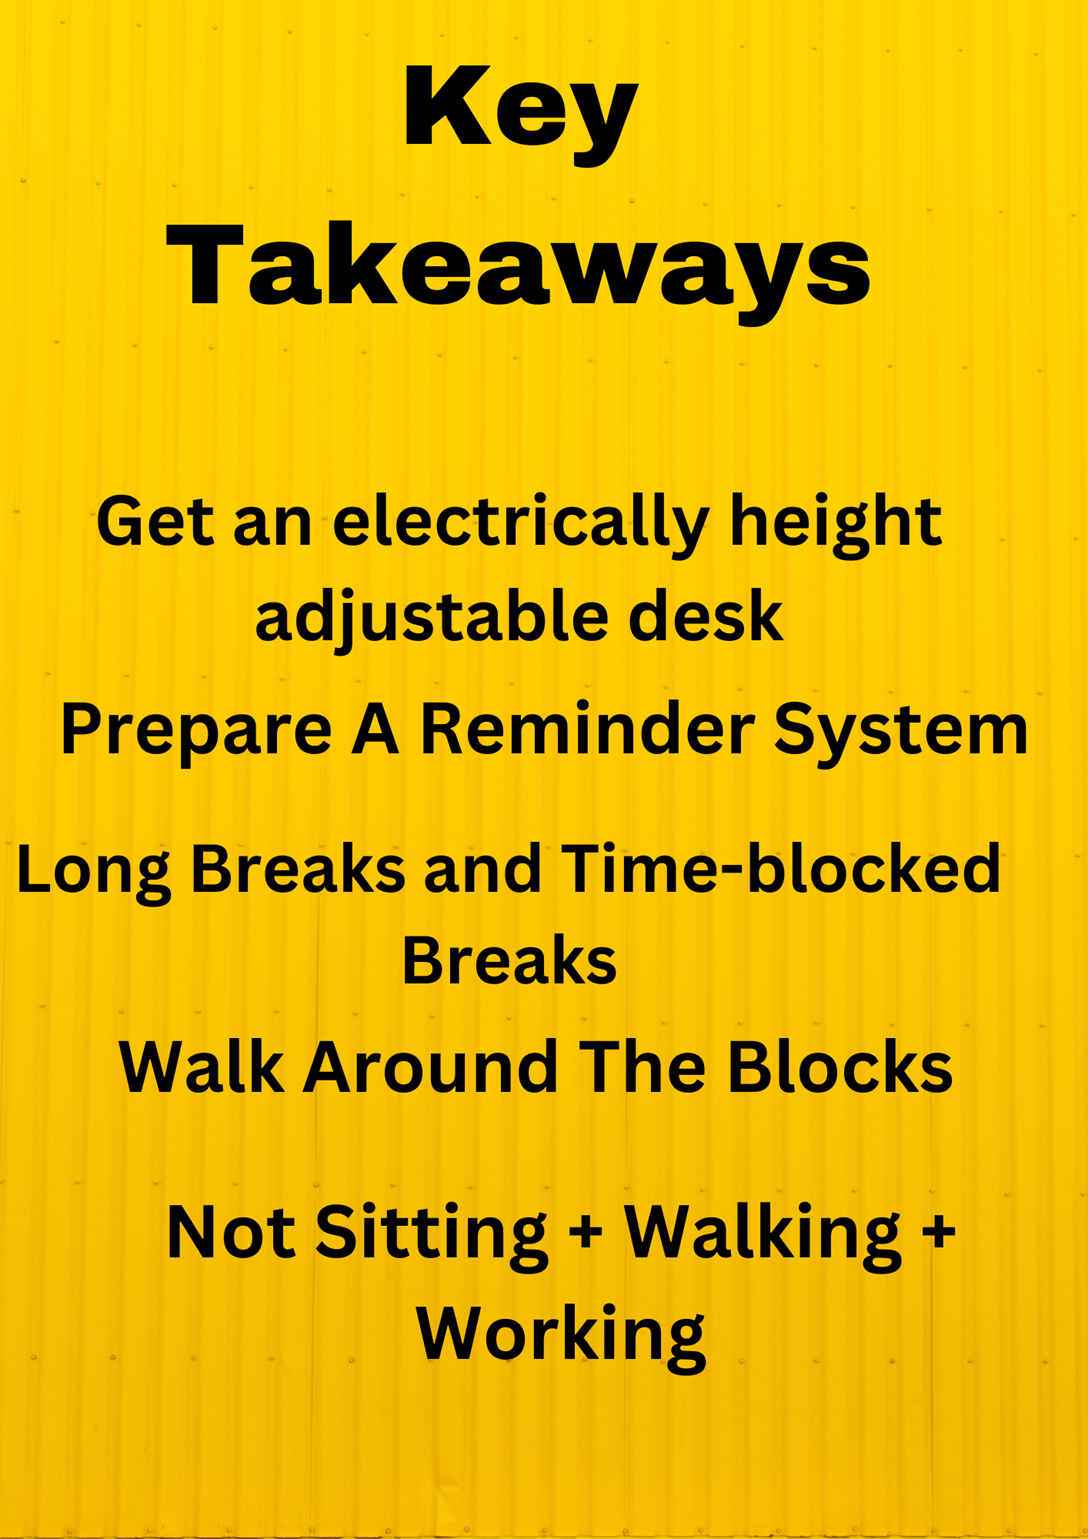 Key Takeaways of how to reduce side effects of prolonged sitting